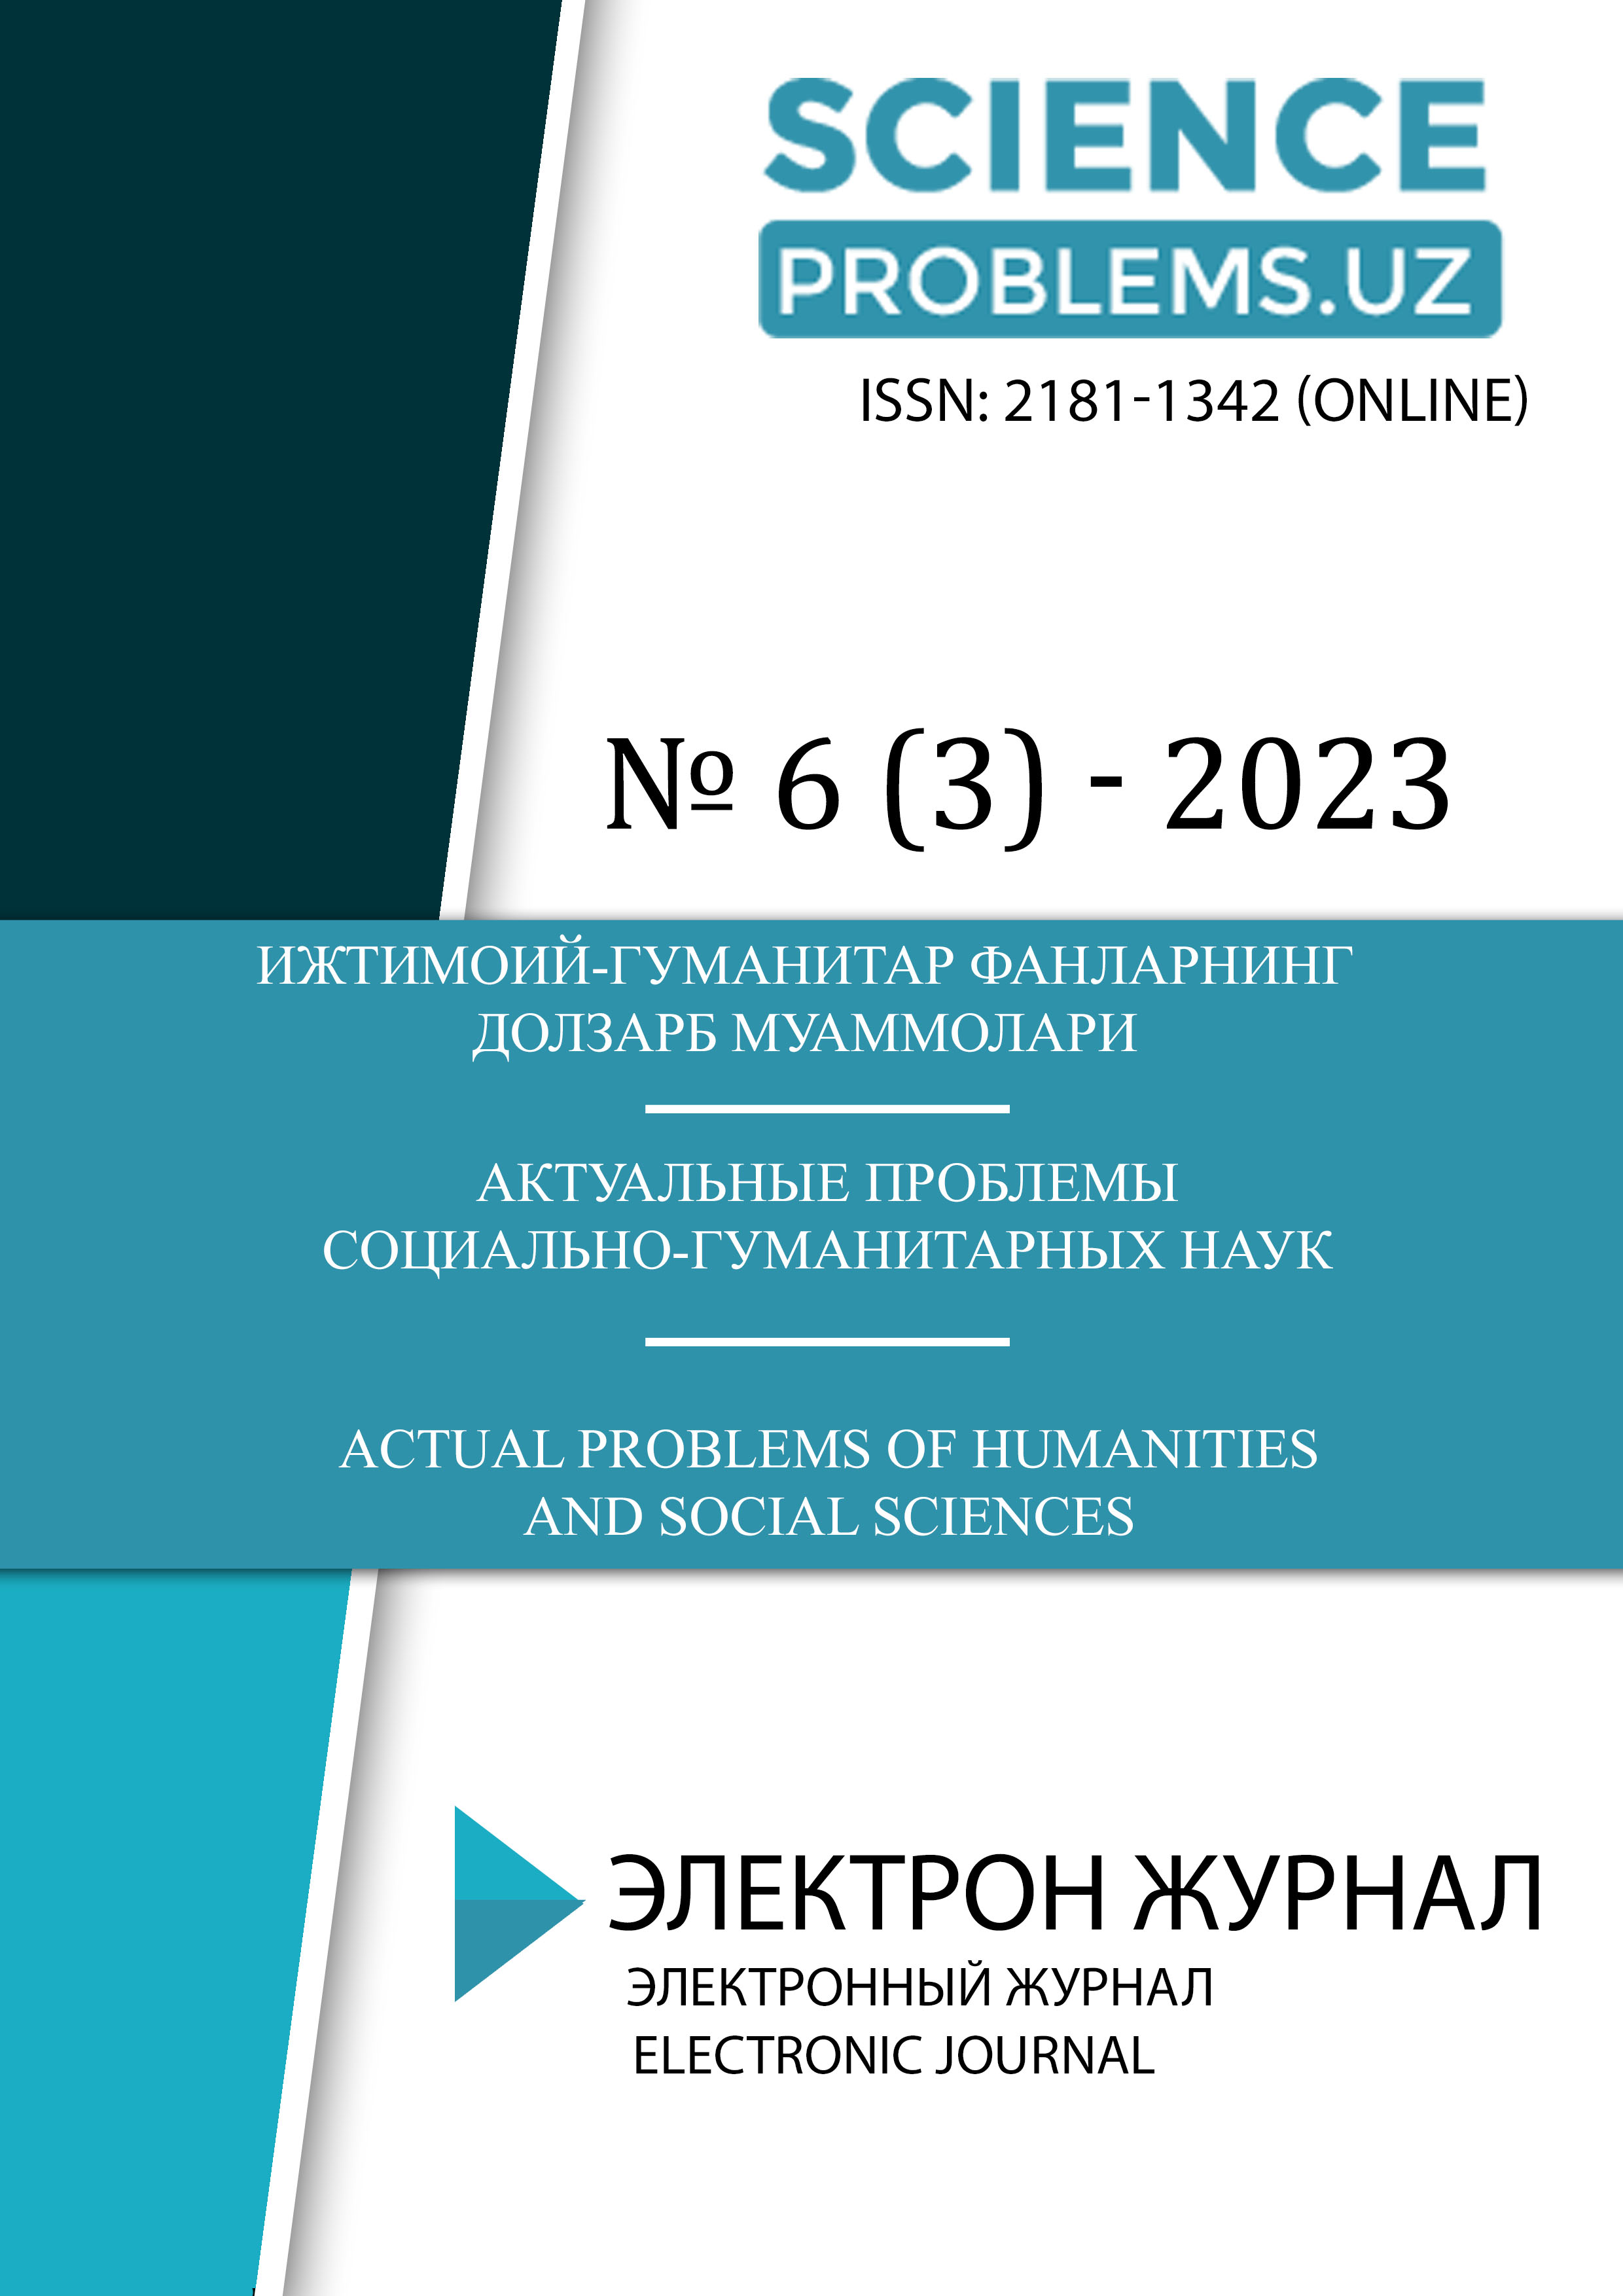 					View Vol. 3 No. 6 (2023): ACTUAL PROBLEMS OF HUMANITIES AND SOCIAL SCIENCES
				